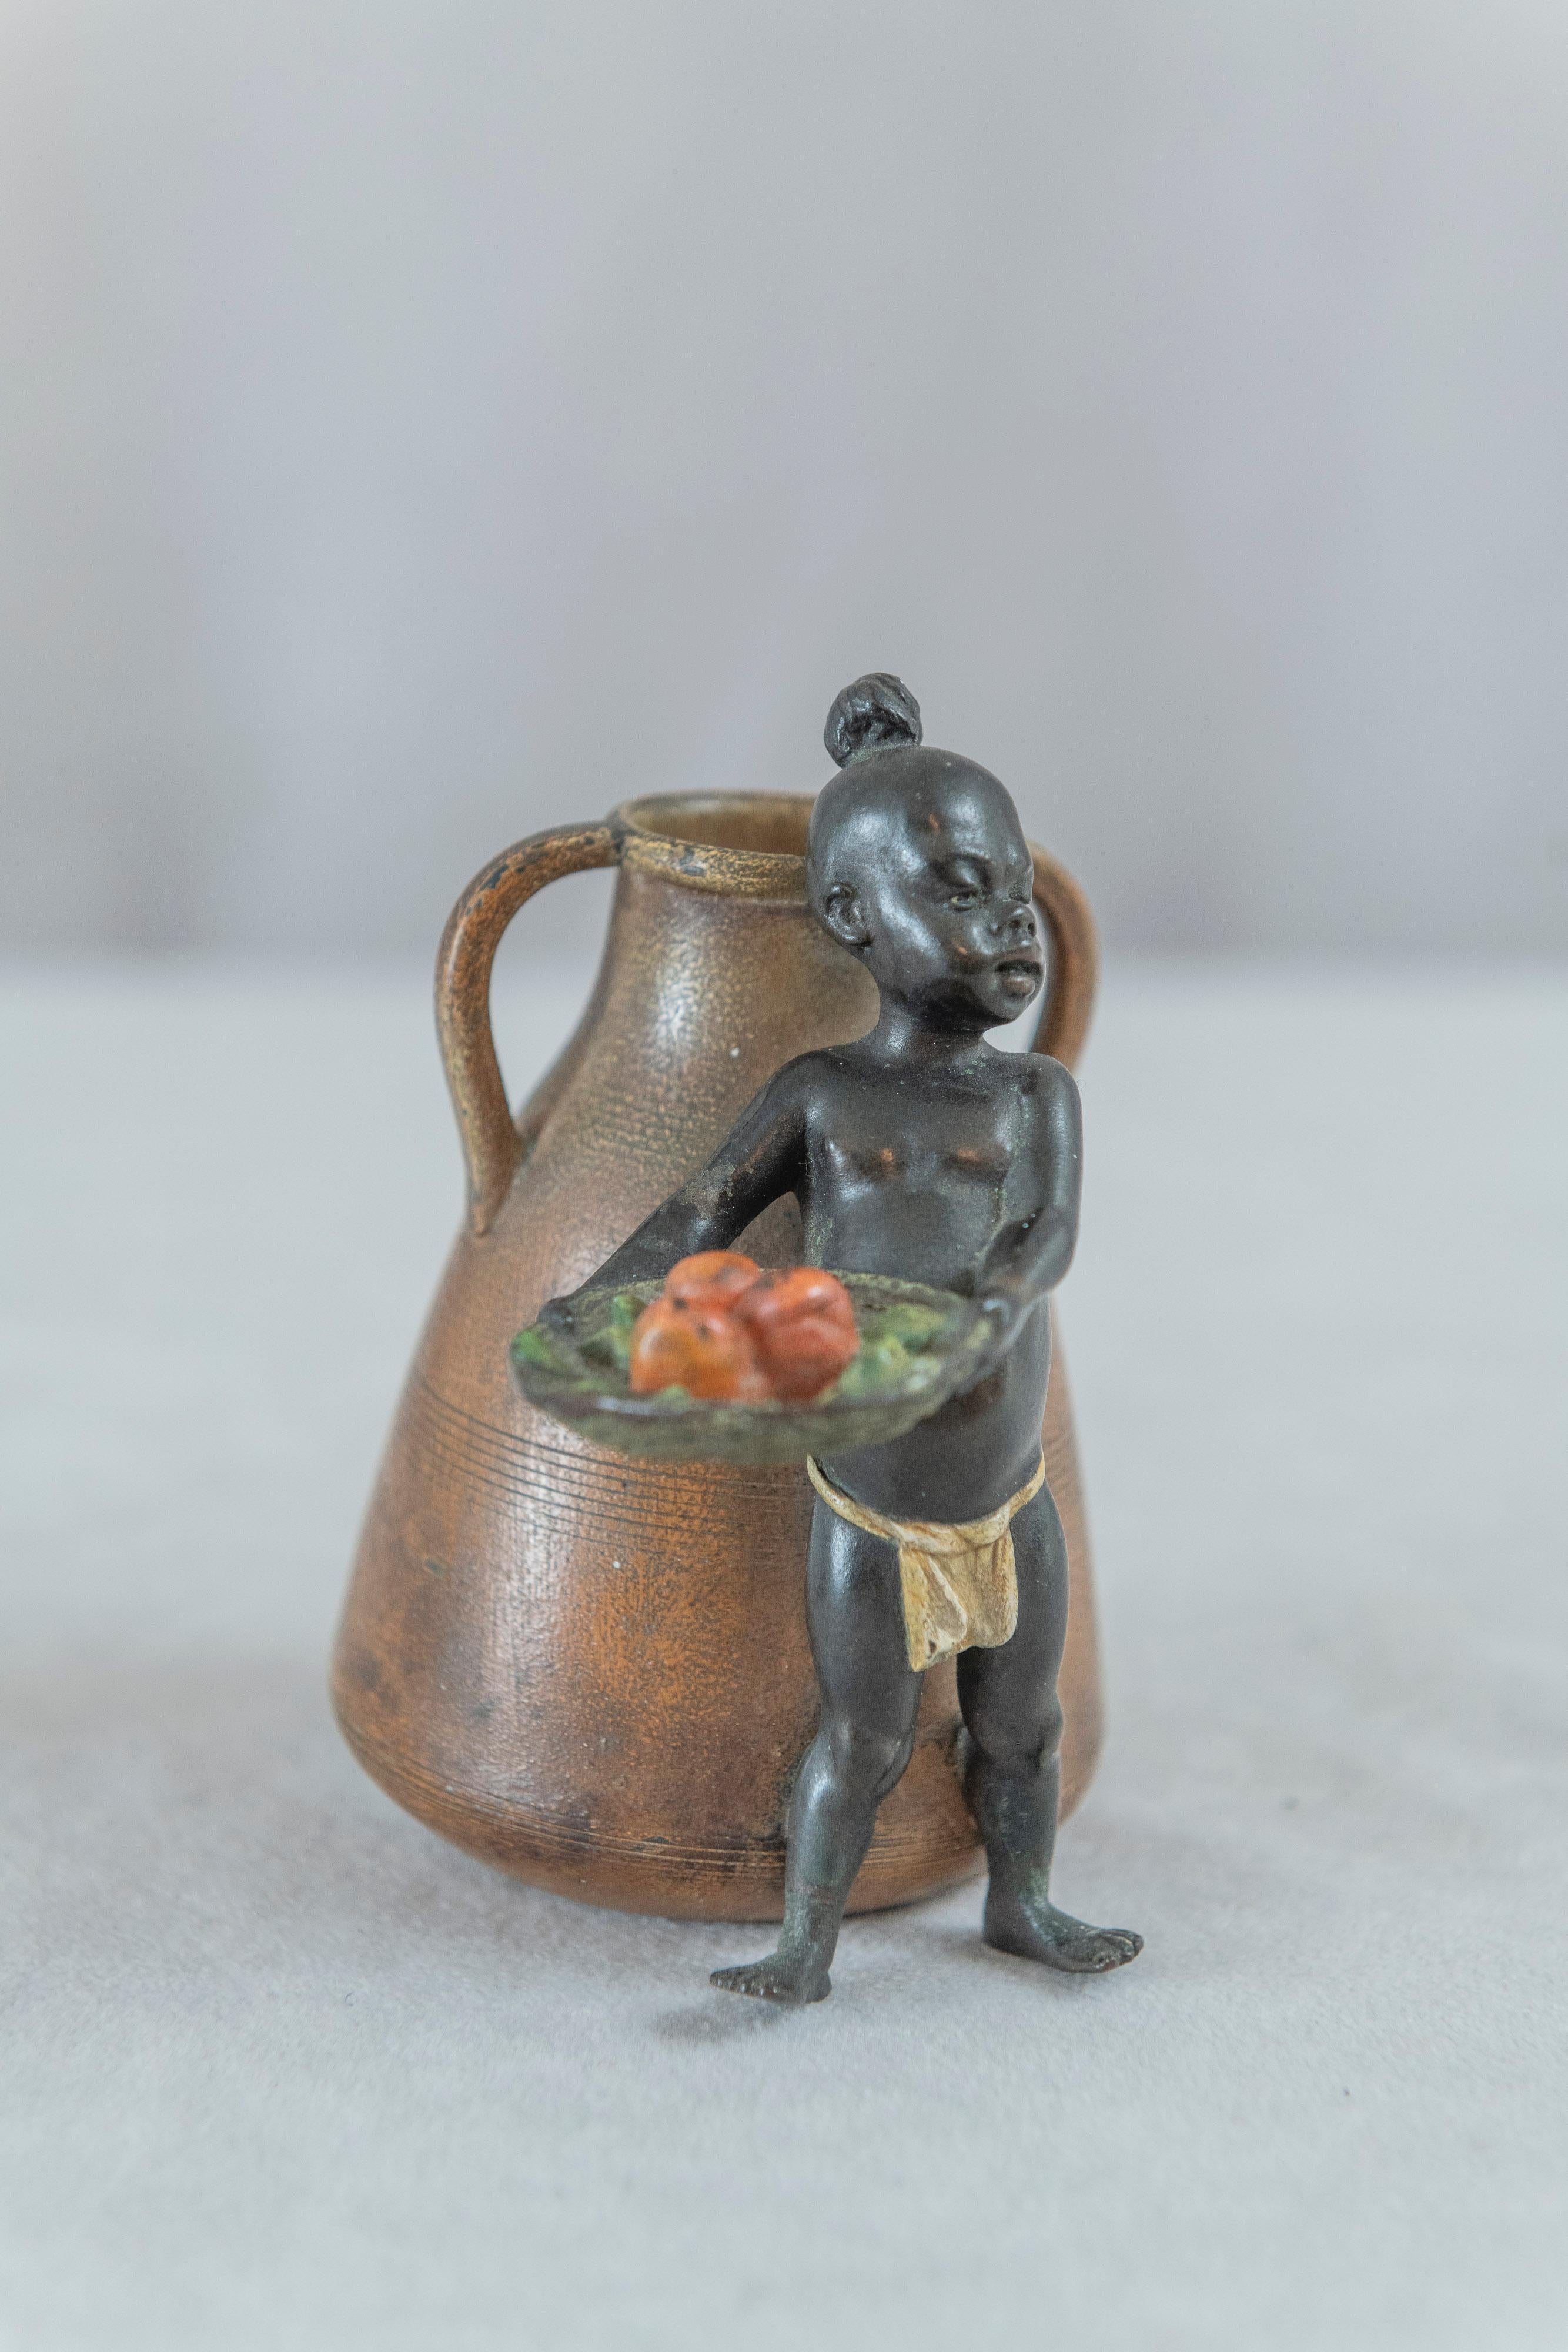  This highly detailed cold painted bronze was meticulously executed by the premier maker of Vienna bronzes, Franz Bergmann. The foundry signature is boldly impressed under the boy's basket. The young boy stands proudly with his basket of fruit that